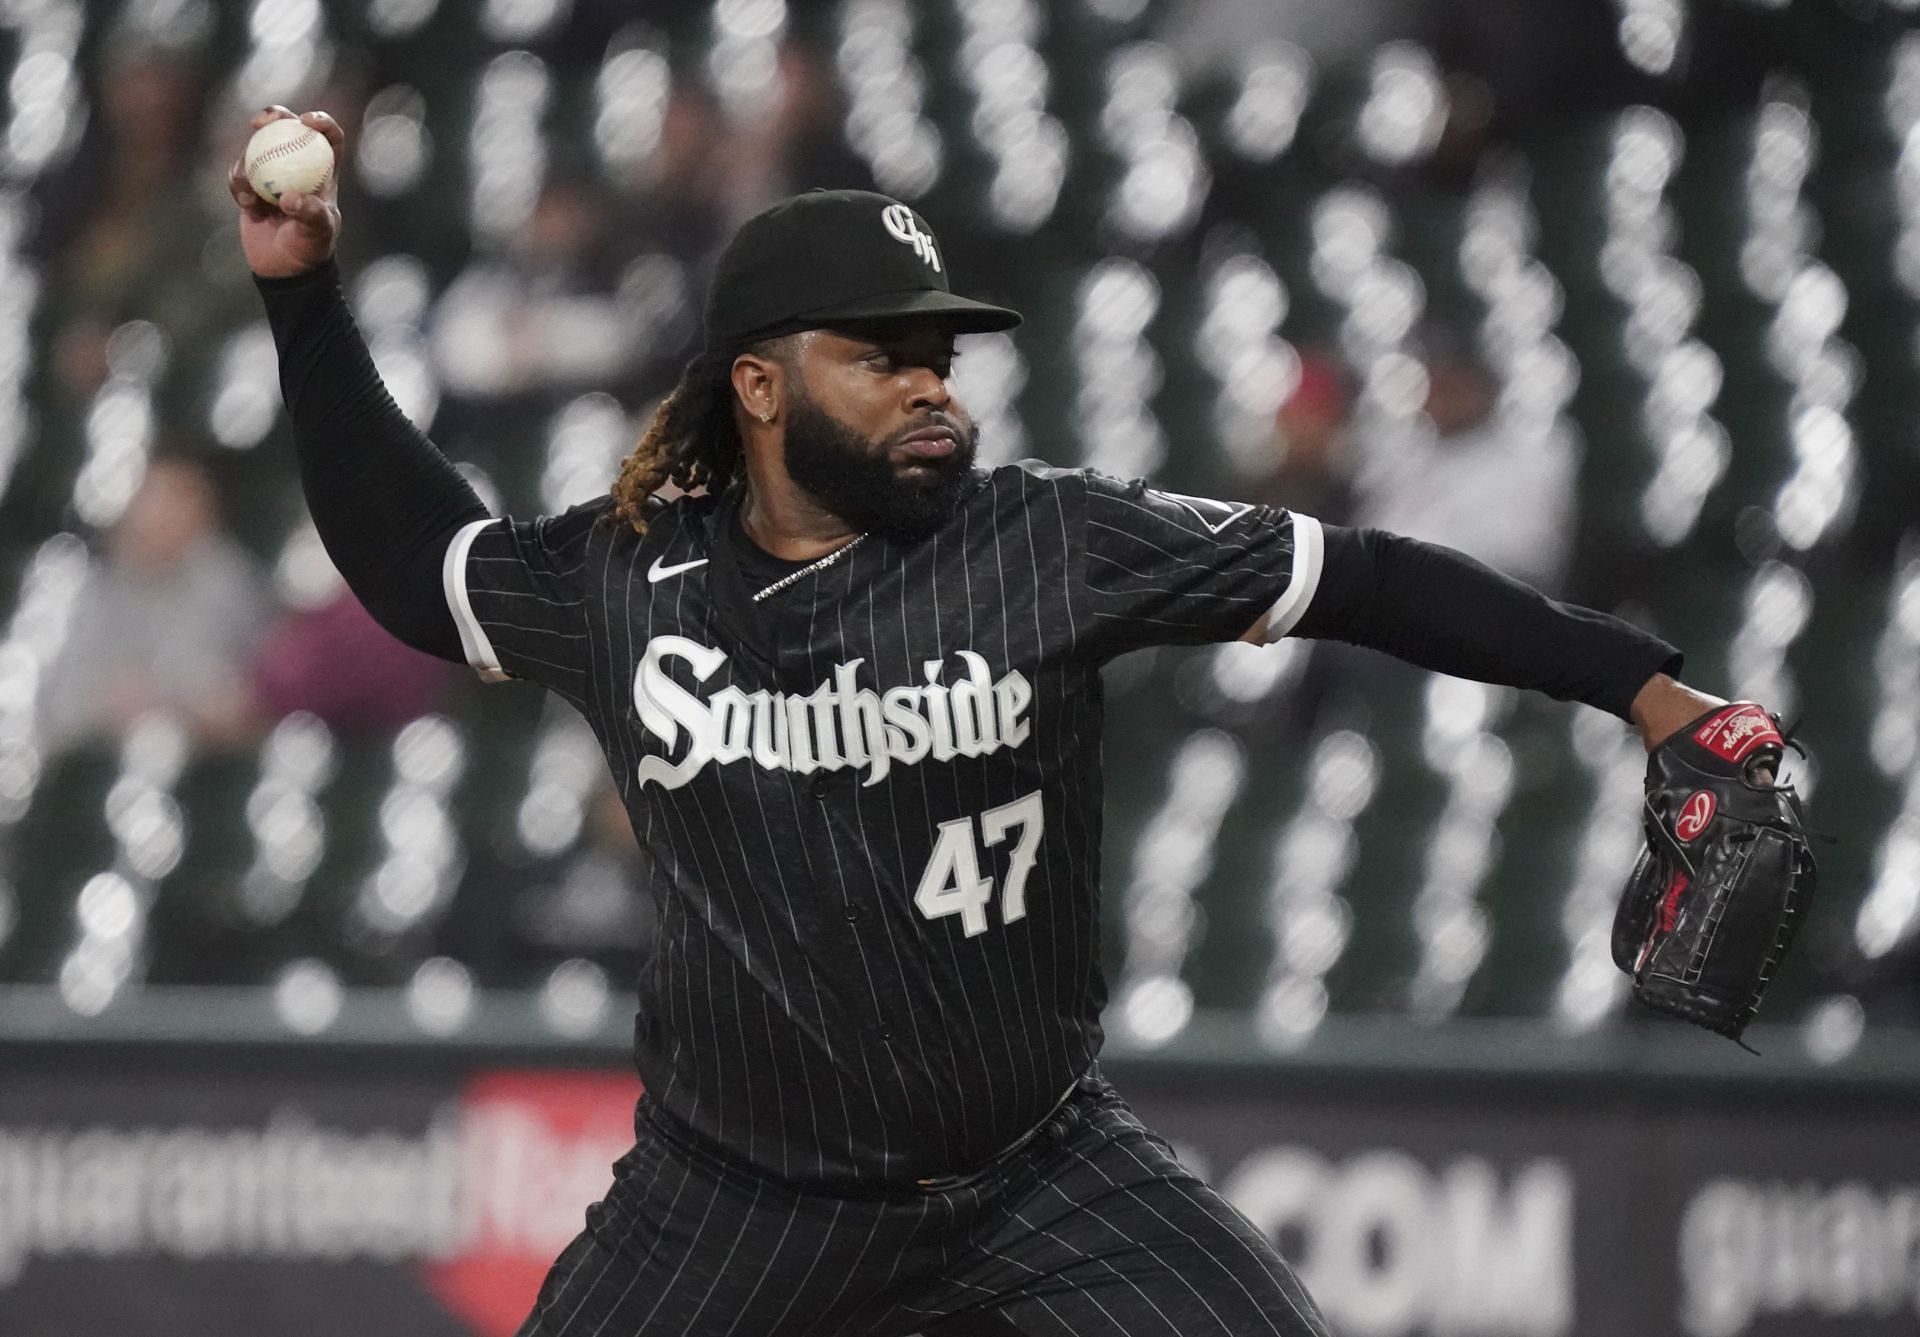 Reds' Cueto wants new deal before opening day